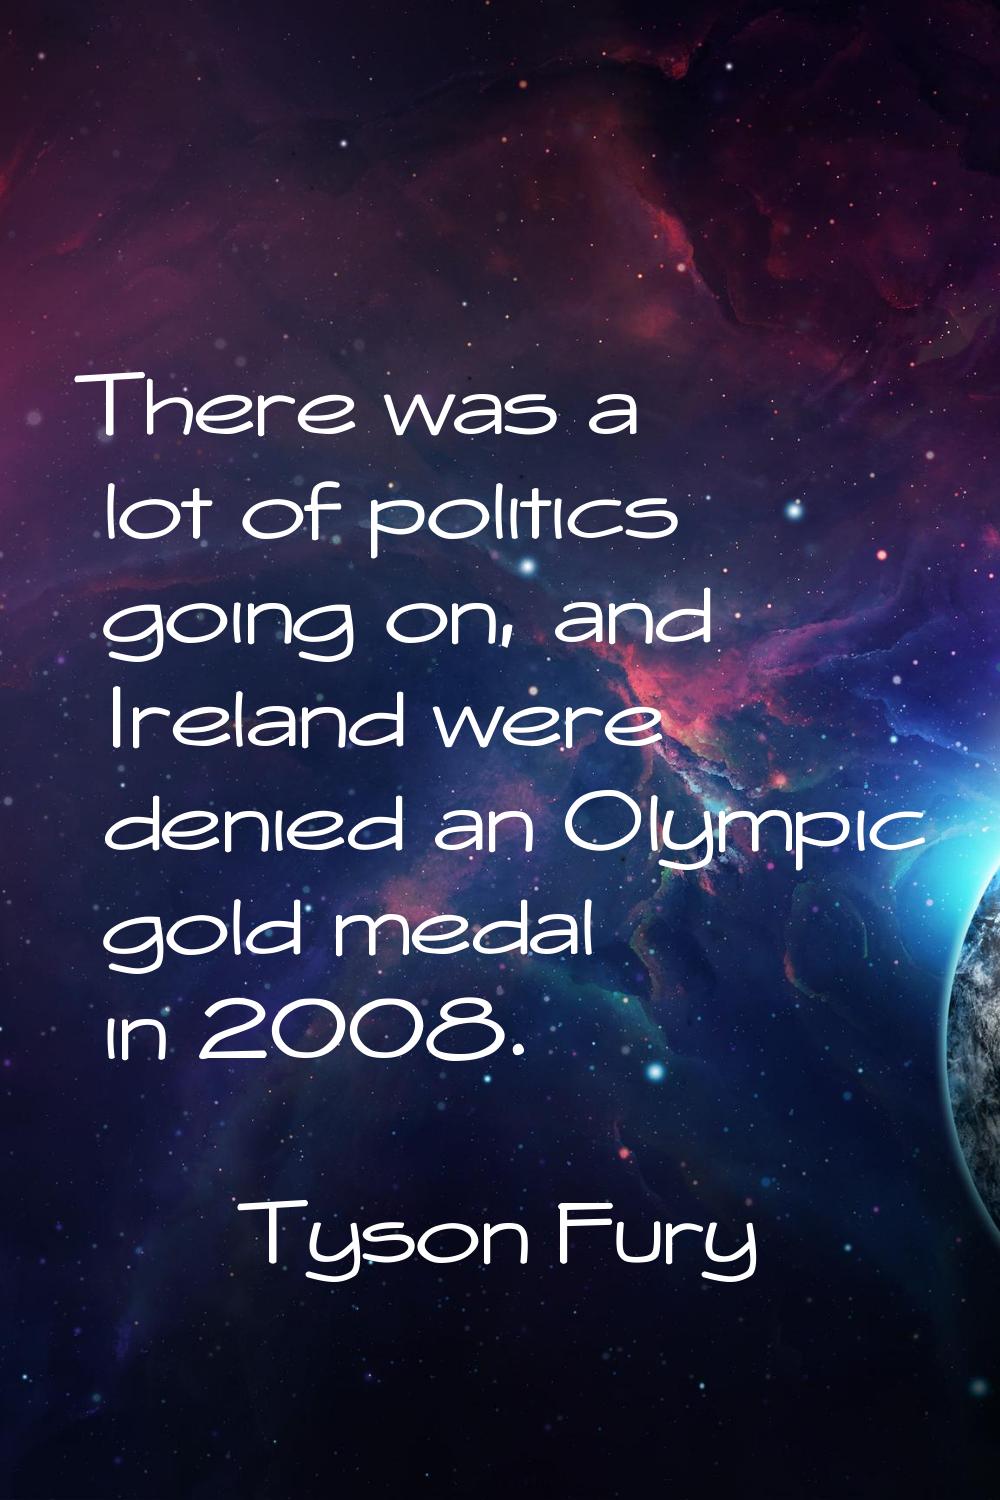 There was a lot of politics going on, and Ireland were denied an Olympic gold medal in 2008.